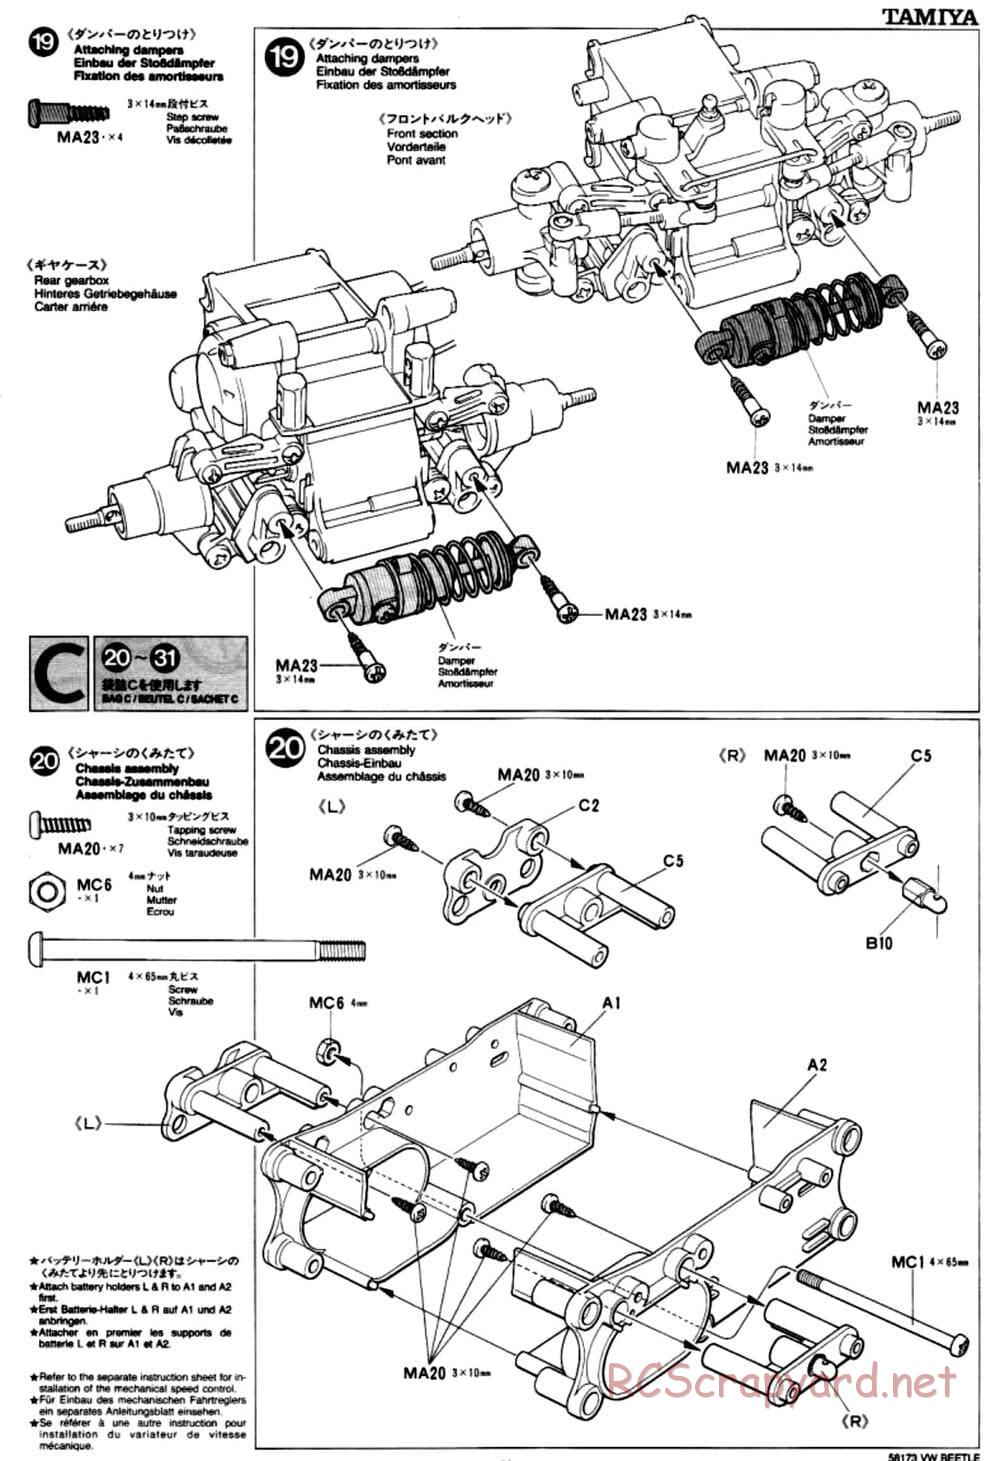 Tamiya - Volkswagen Beetle - M02L Chassis - Manual - Page 11